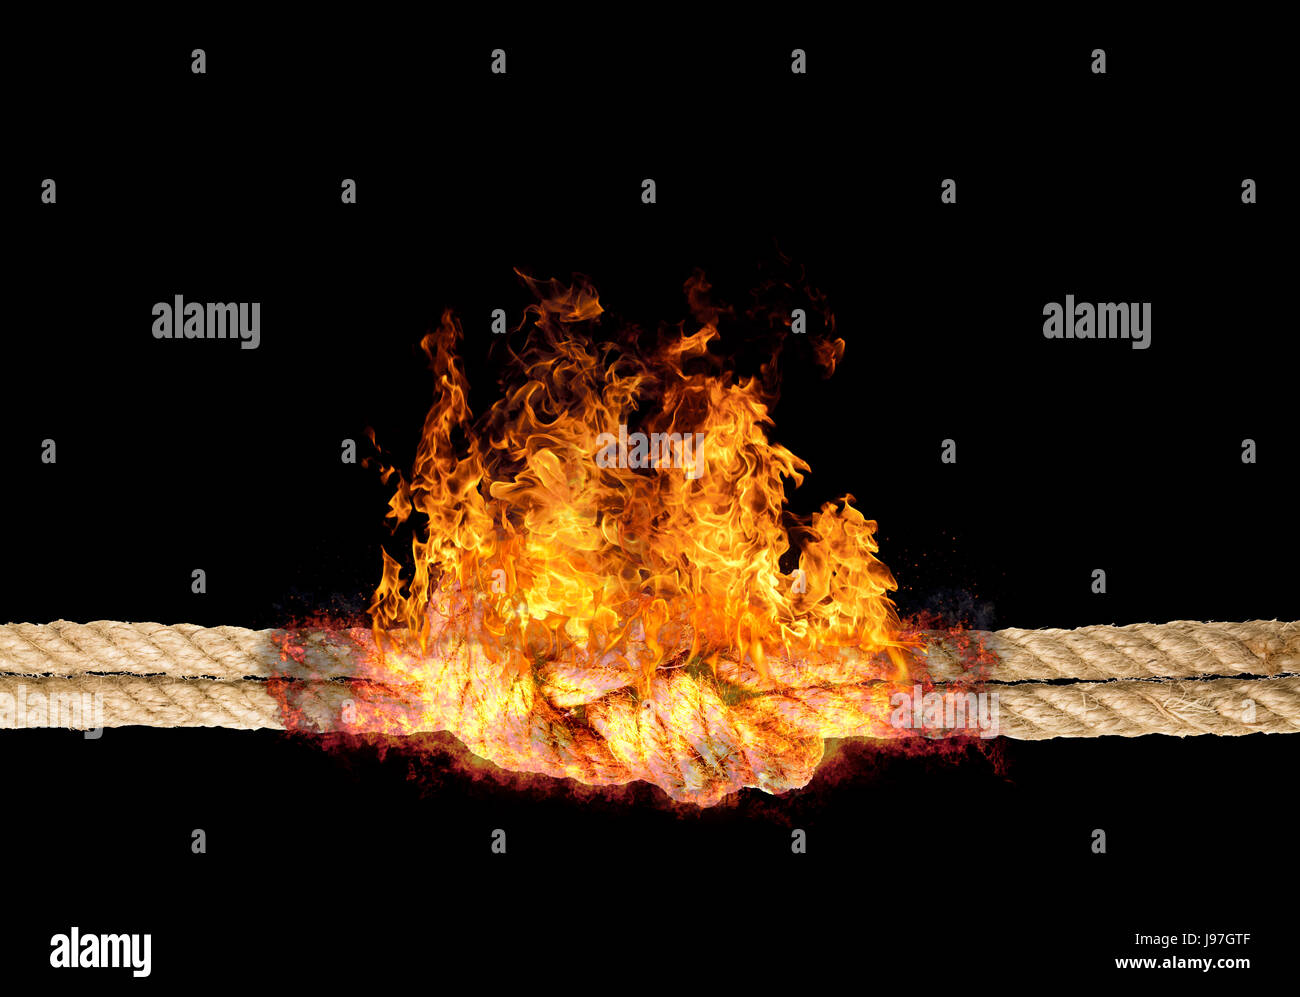 Strong rope with a knot, bursted into flames, isolated against the black colored background Stock Photo